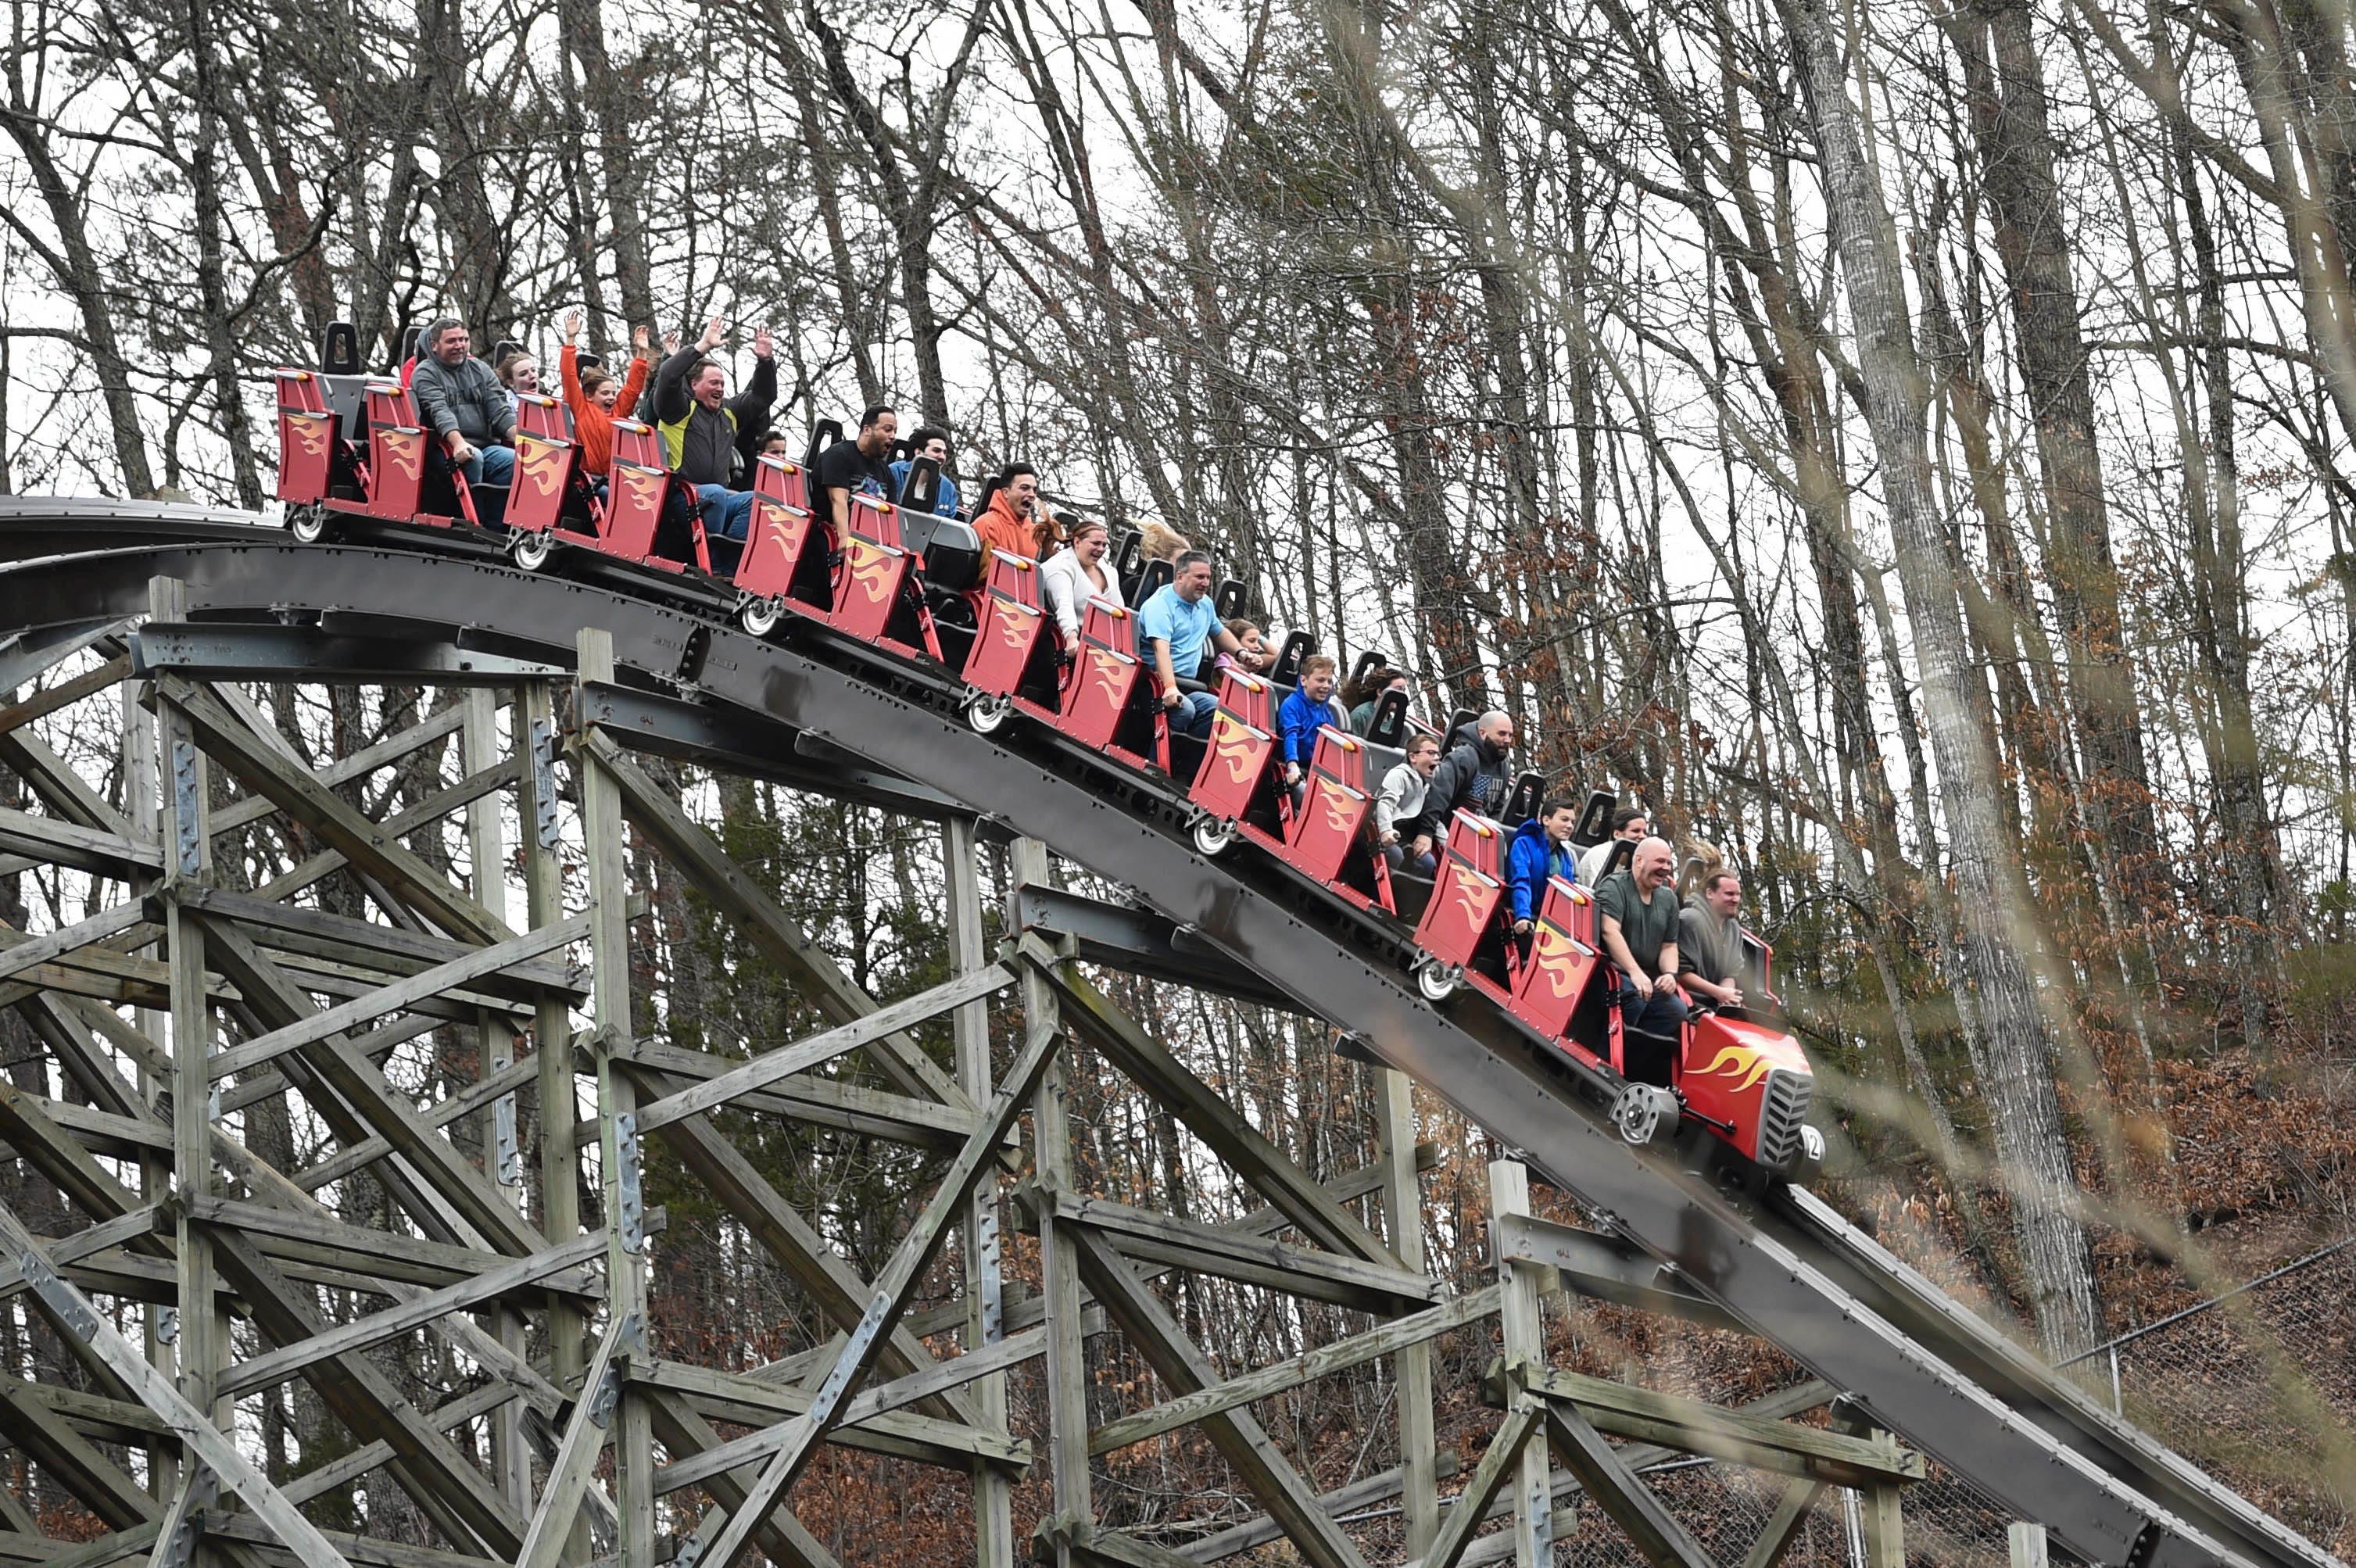 Dollywood wins USA TODAY 10Best for theme park, roller coaster, hotels, waterpark